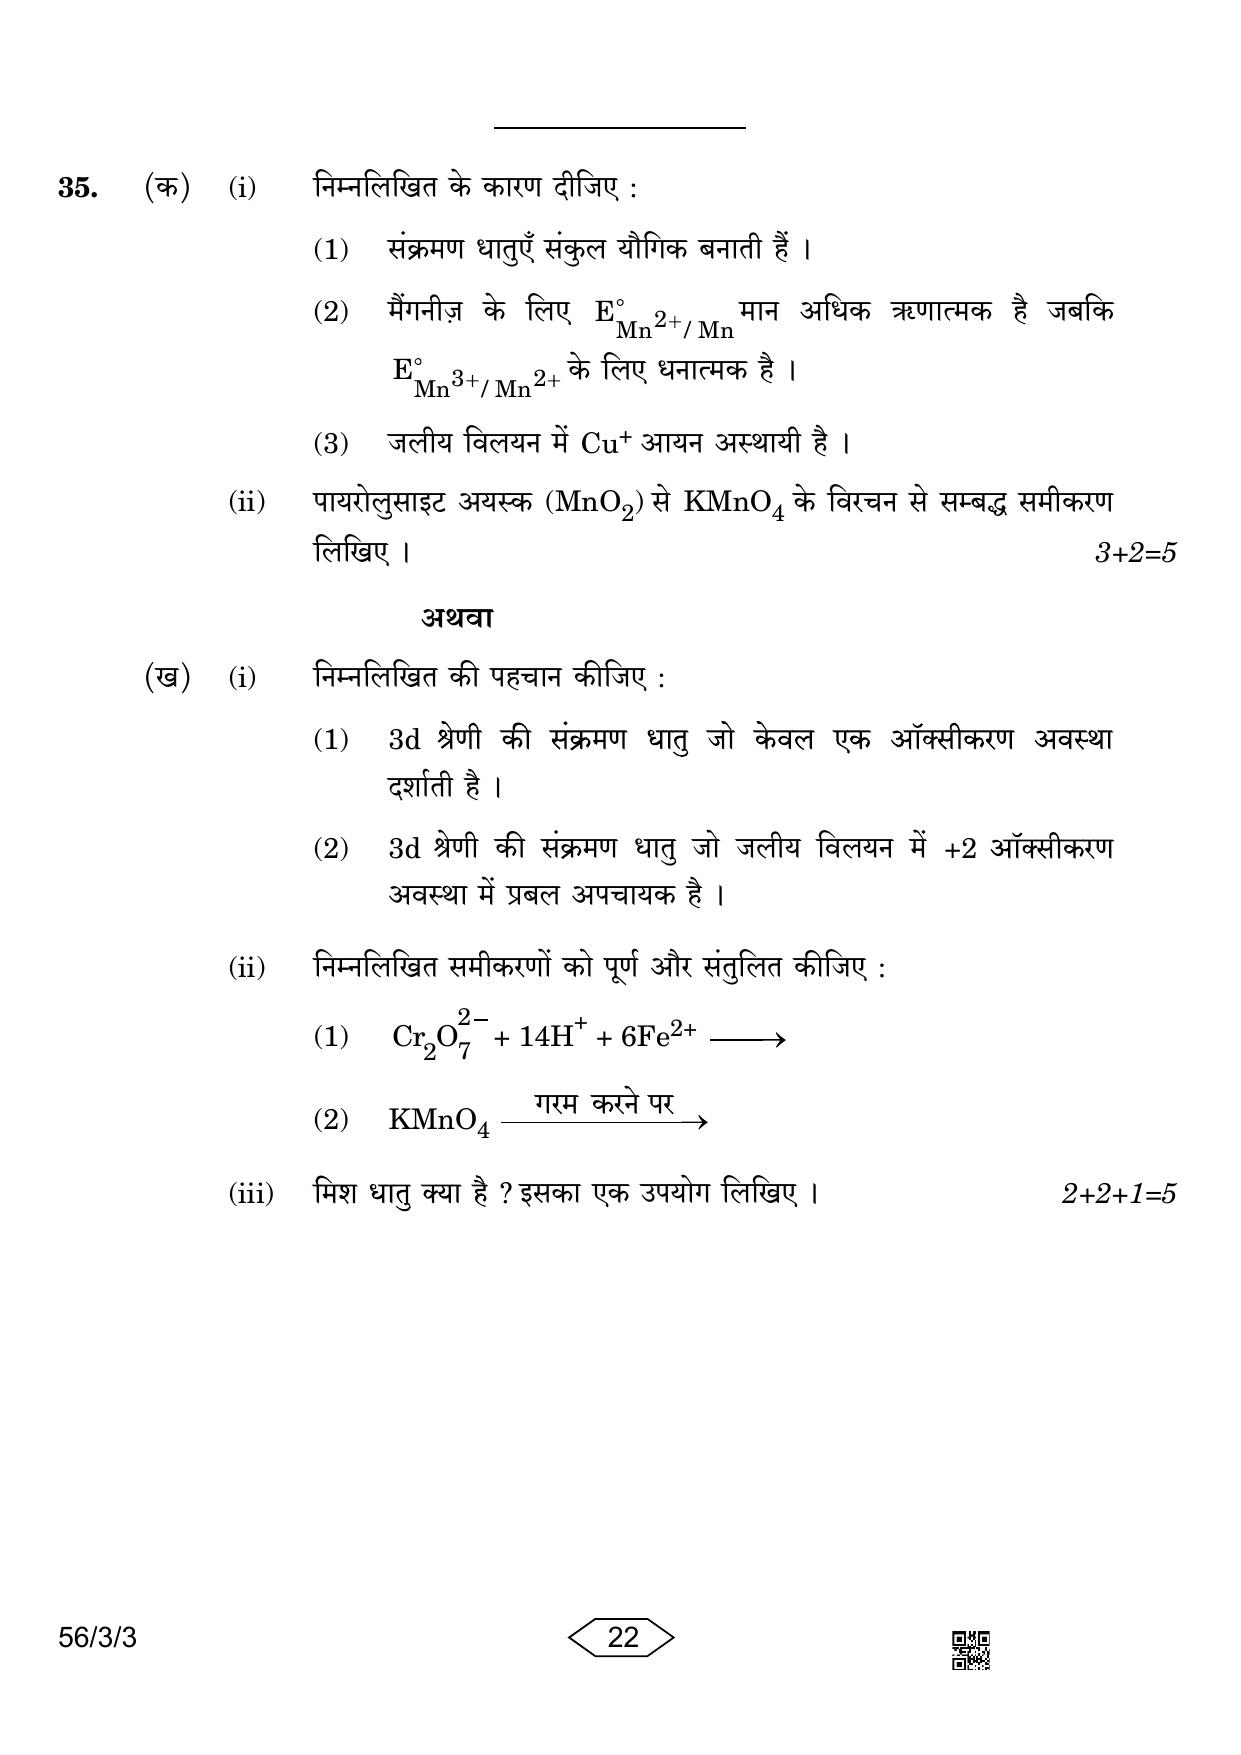 CBSE Class 12 56-3-3 Chemistry 2023 Question Paper - Page 22